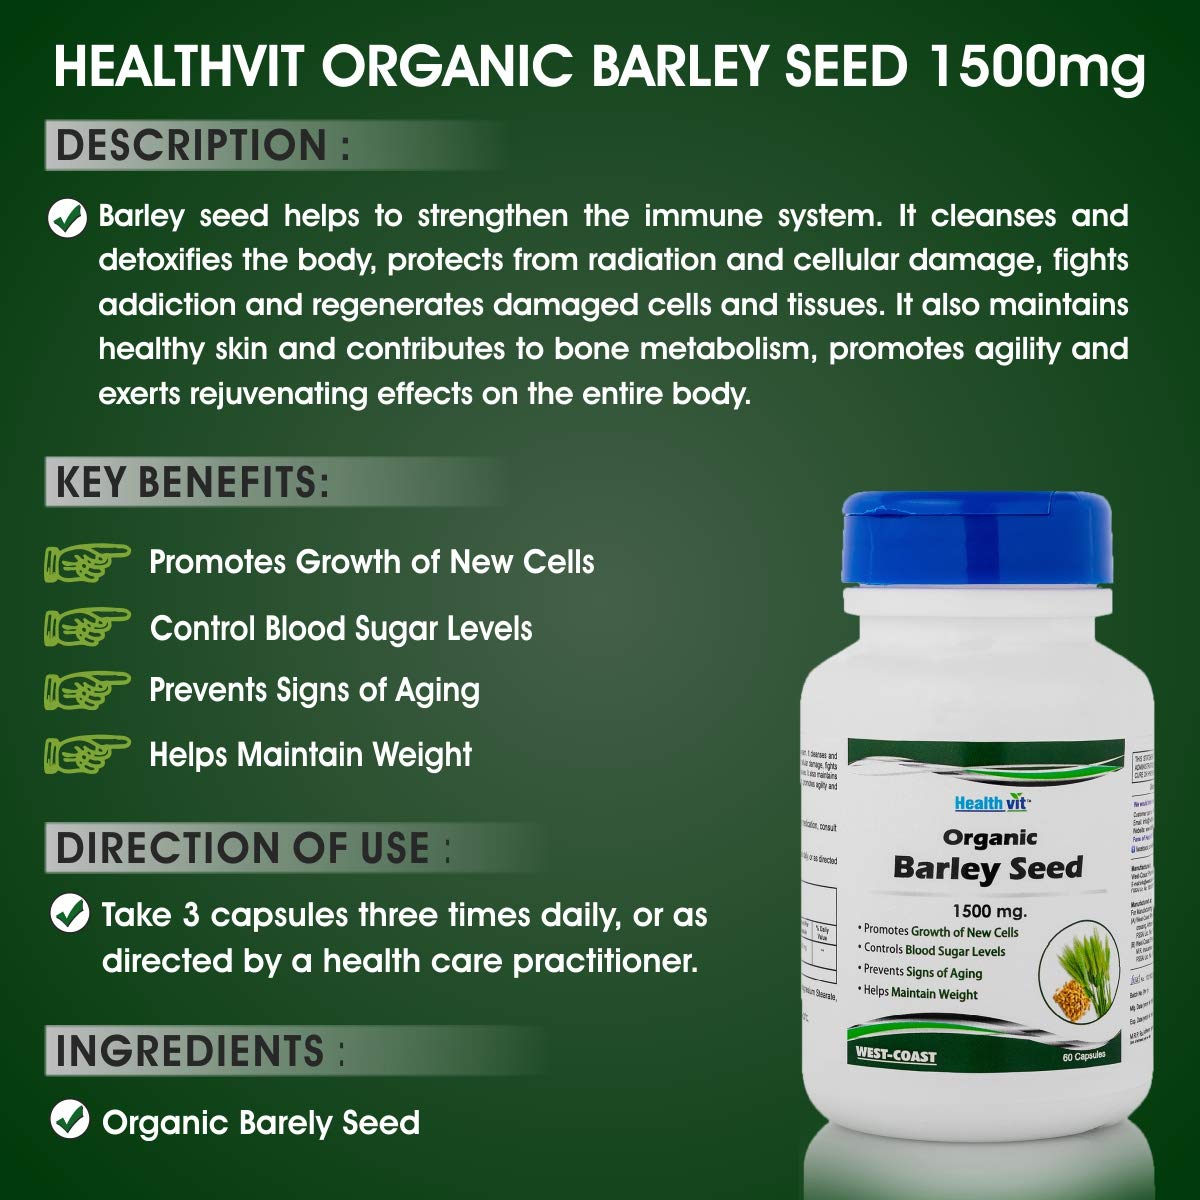 Healthvit Organic Barley Seed 1500 mg - Promotes Growth of New Cells | Control Blood Sugar Levels | Prevents Signs of Aging | Helps In Weight Management | Herbal Supplement | 60 Capsules